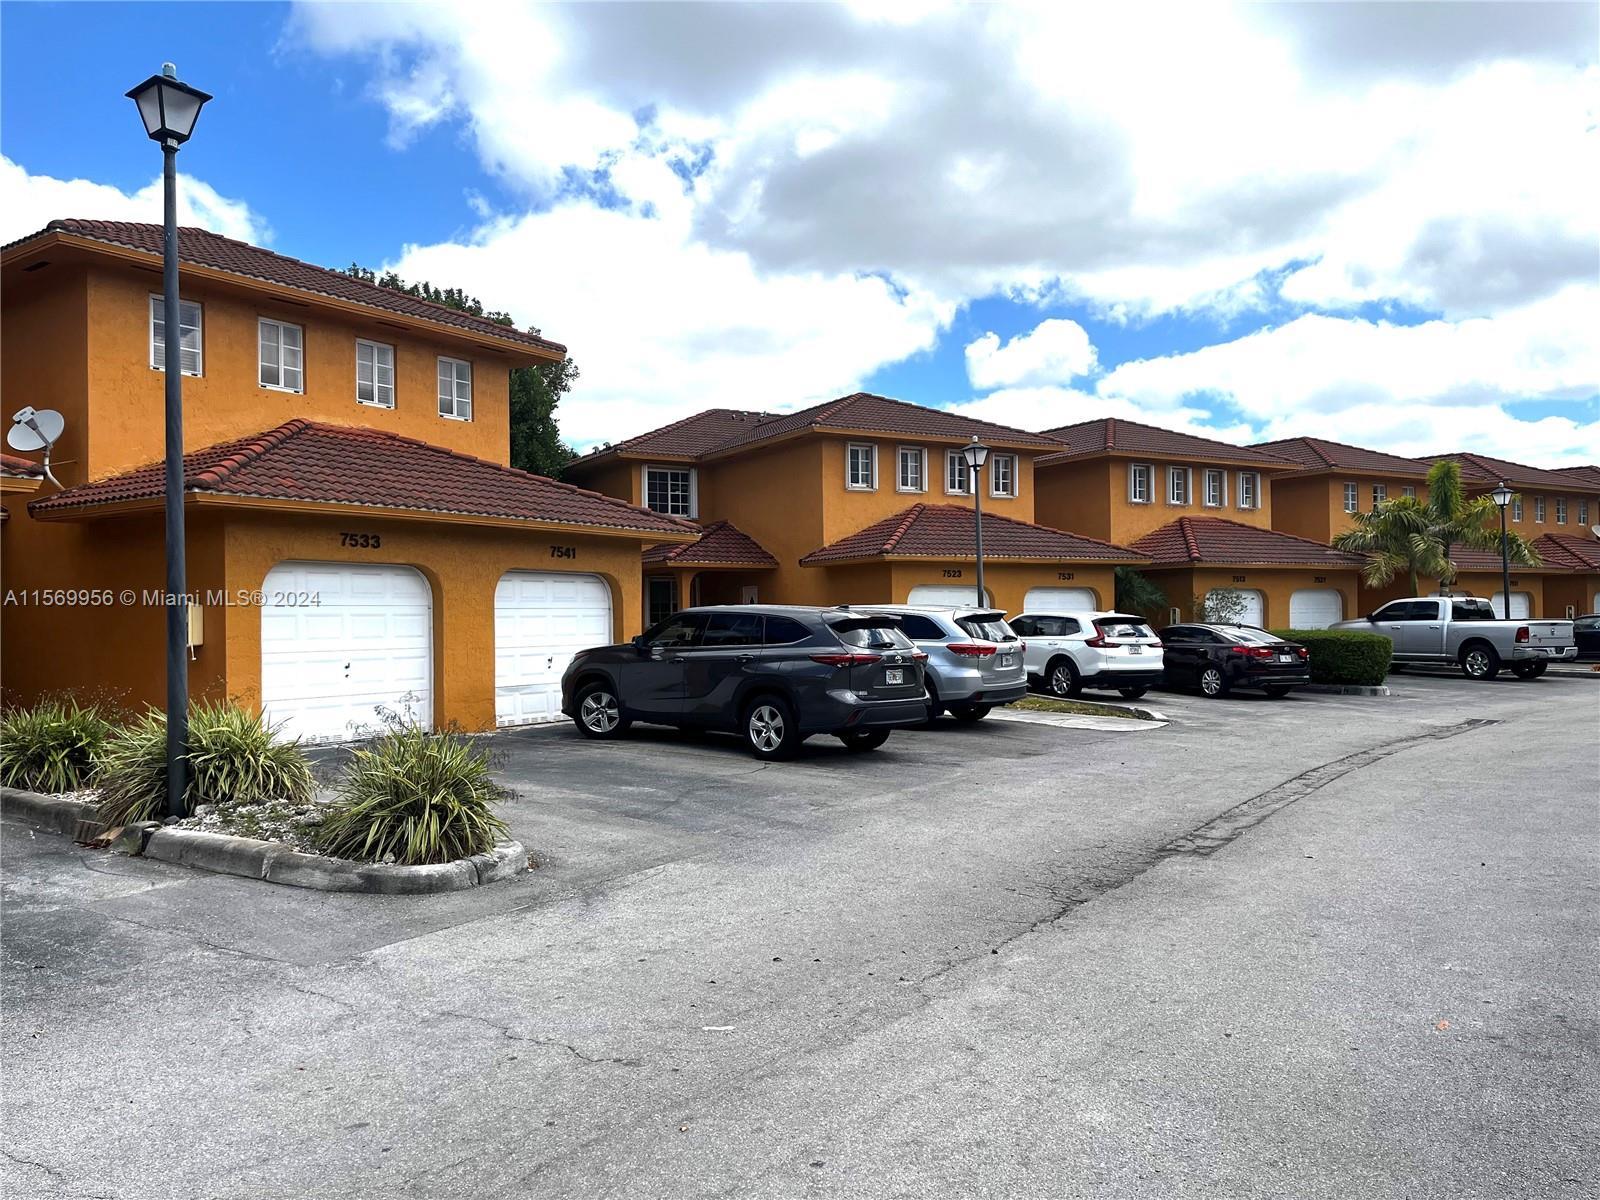 Spacious single story condo-townhome style, located in desirable Hialeah-Miami Lakes area. 3 bedroom